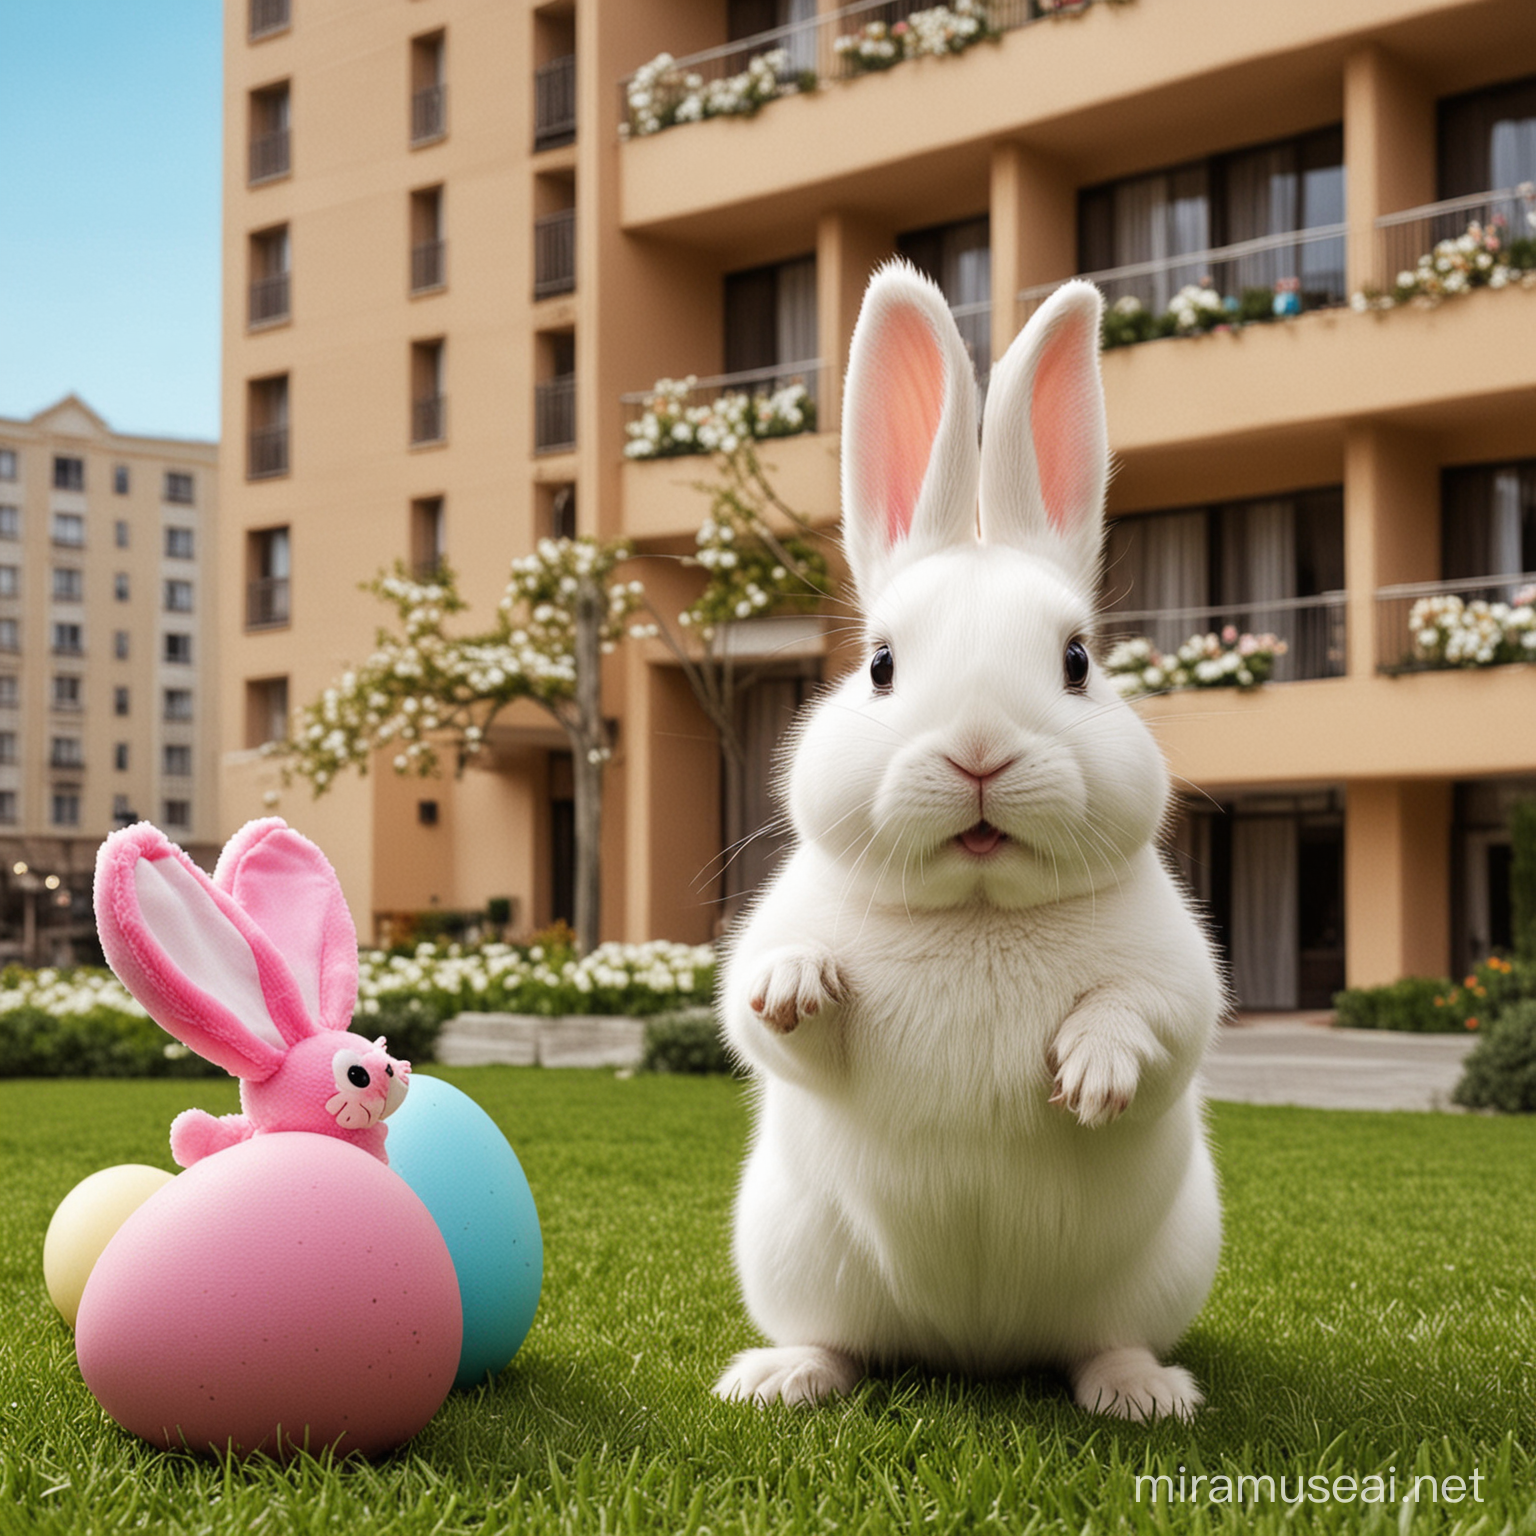 Easter Bunny Enjoying Spring at a Charming Countryside Hotel